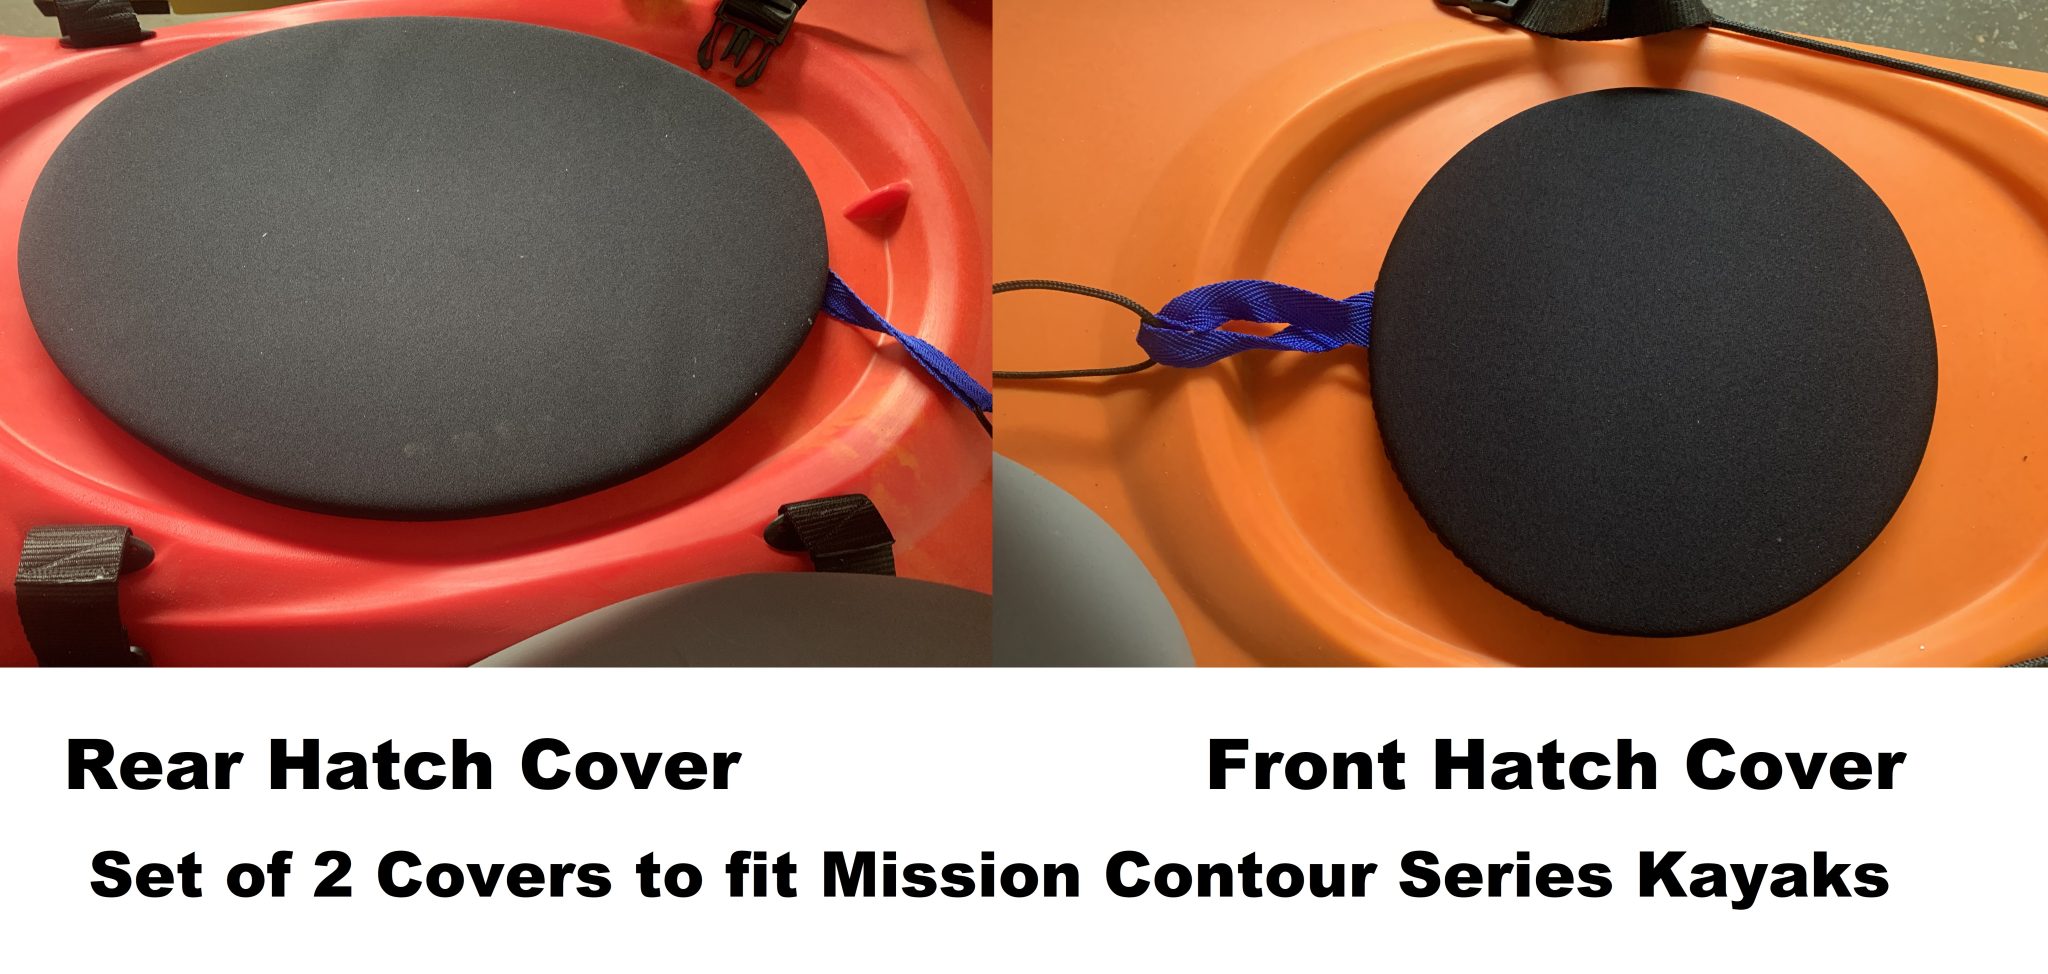 Shows picture of the front and rear hatch with a neopen cover in place. Label says set of 2 covers for Mission contour series kayaks.